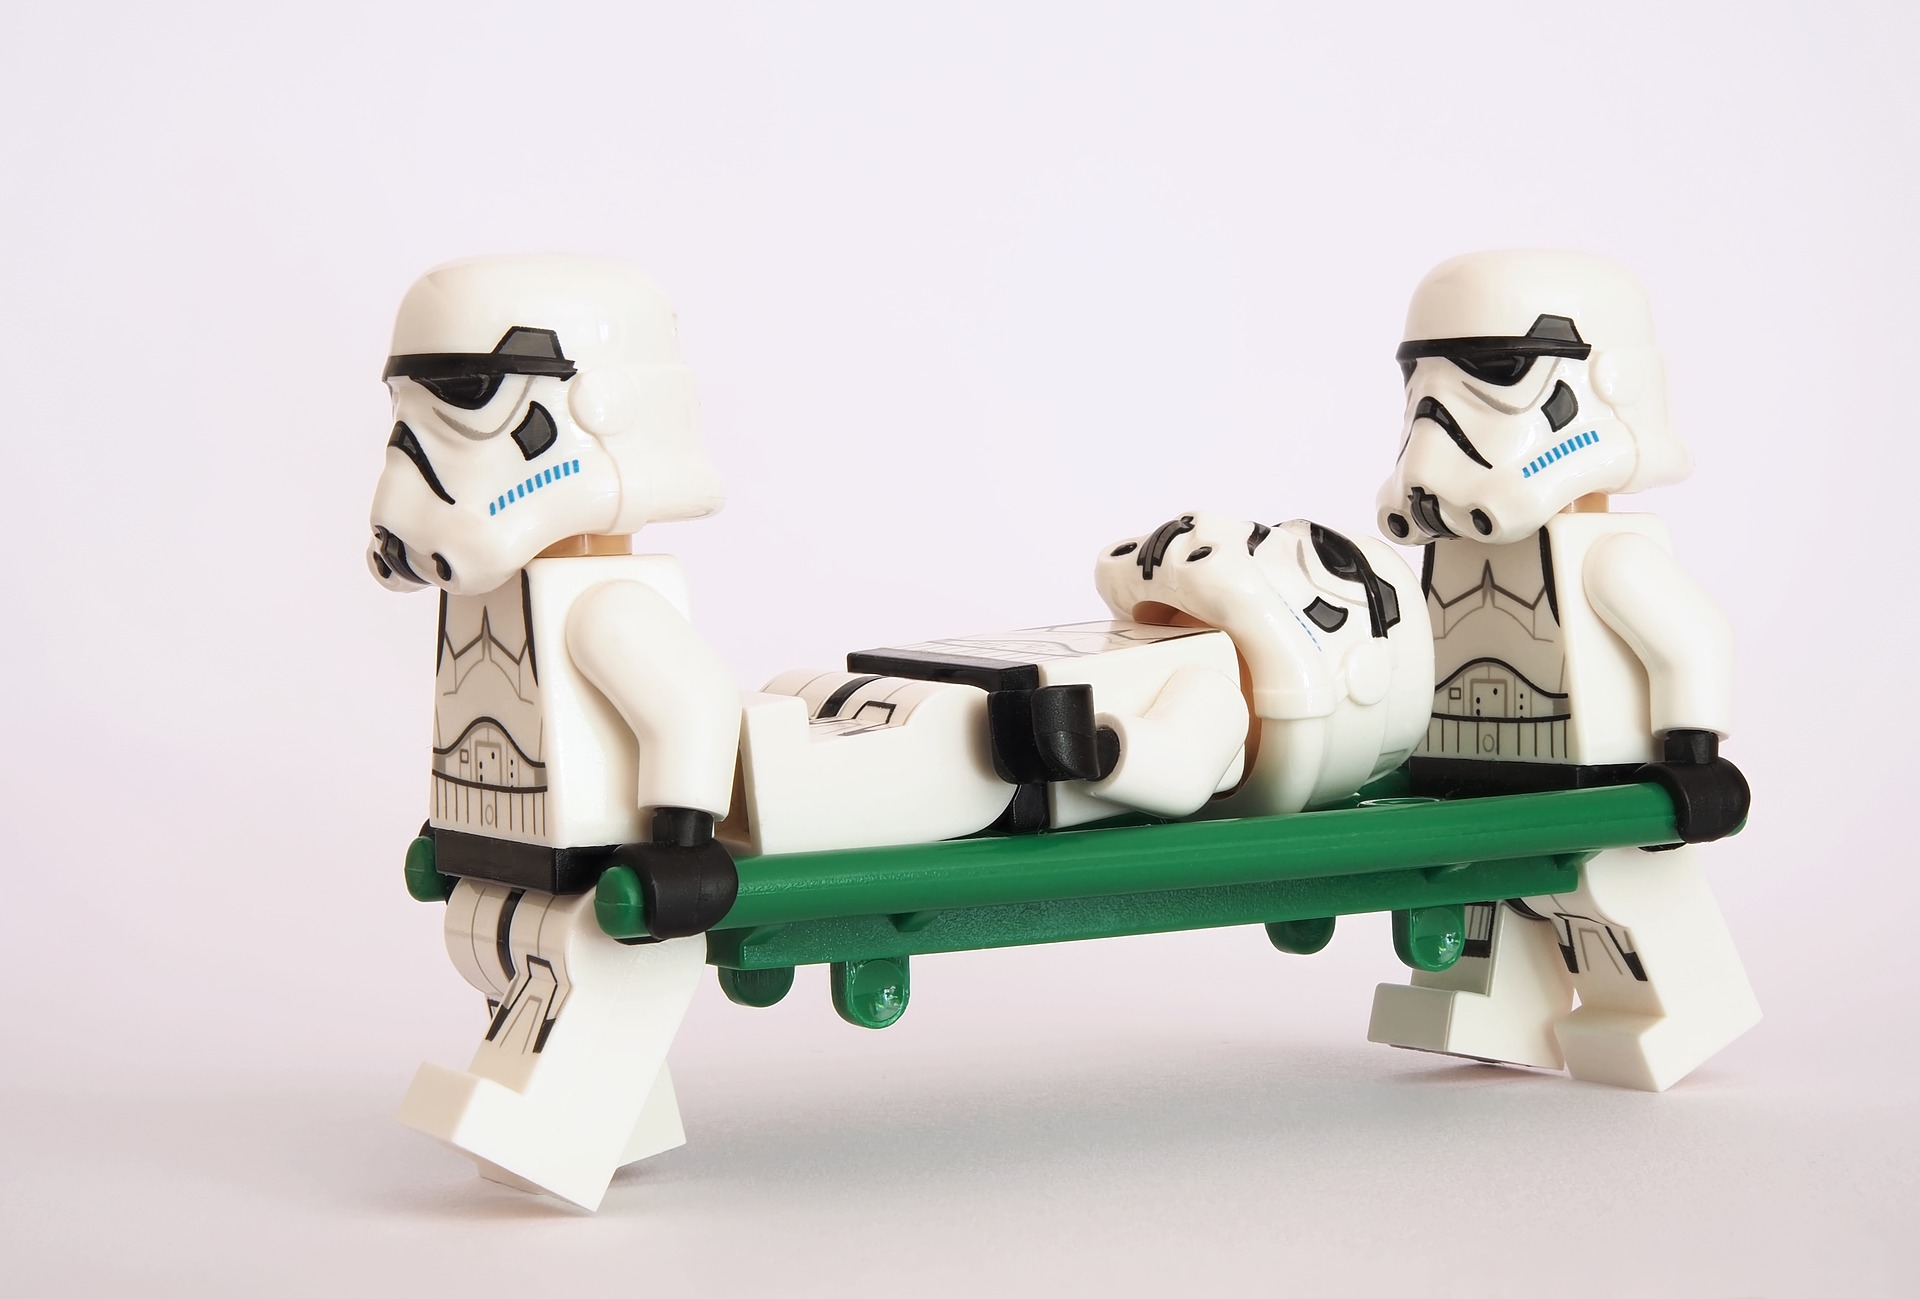 Two Star Wars LEGO characters (storm troopers) carrying a third character on a hospital stretcher